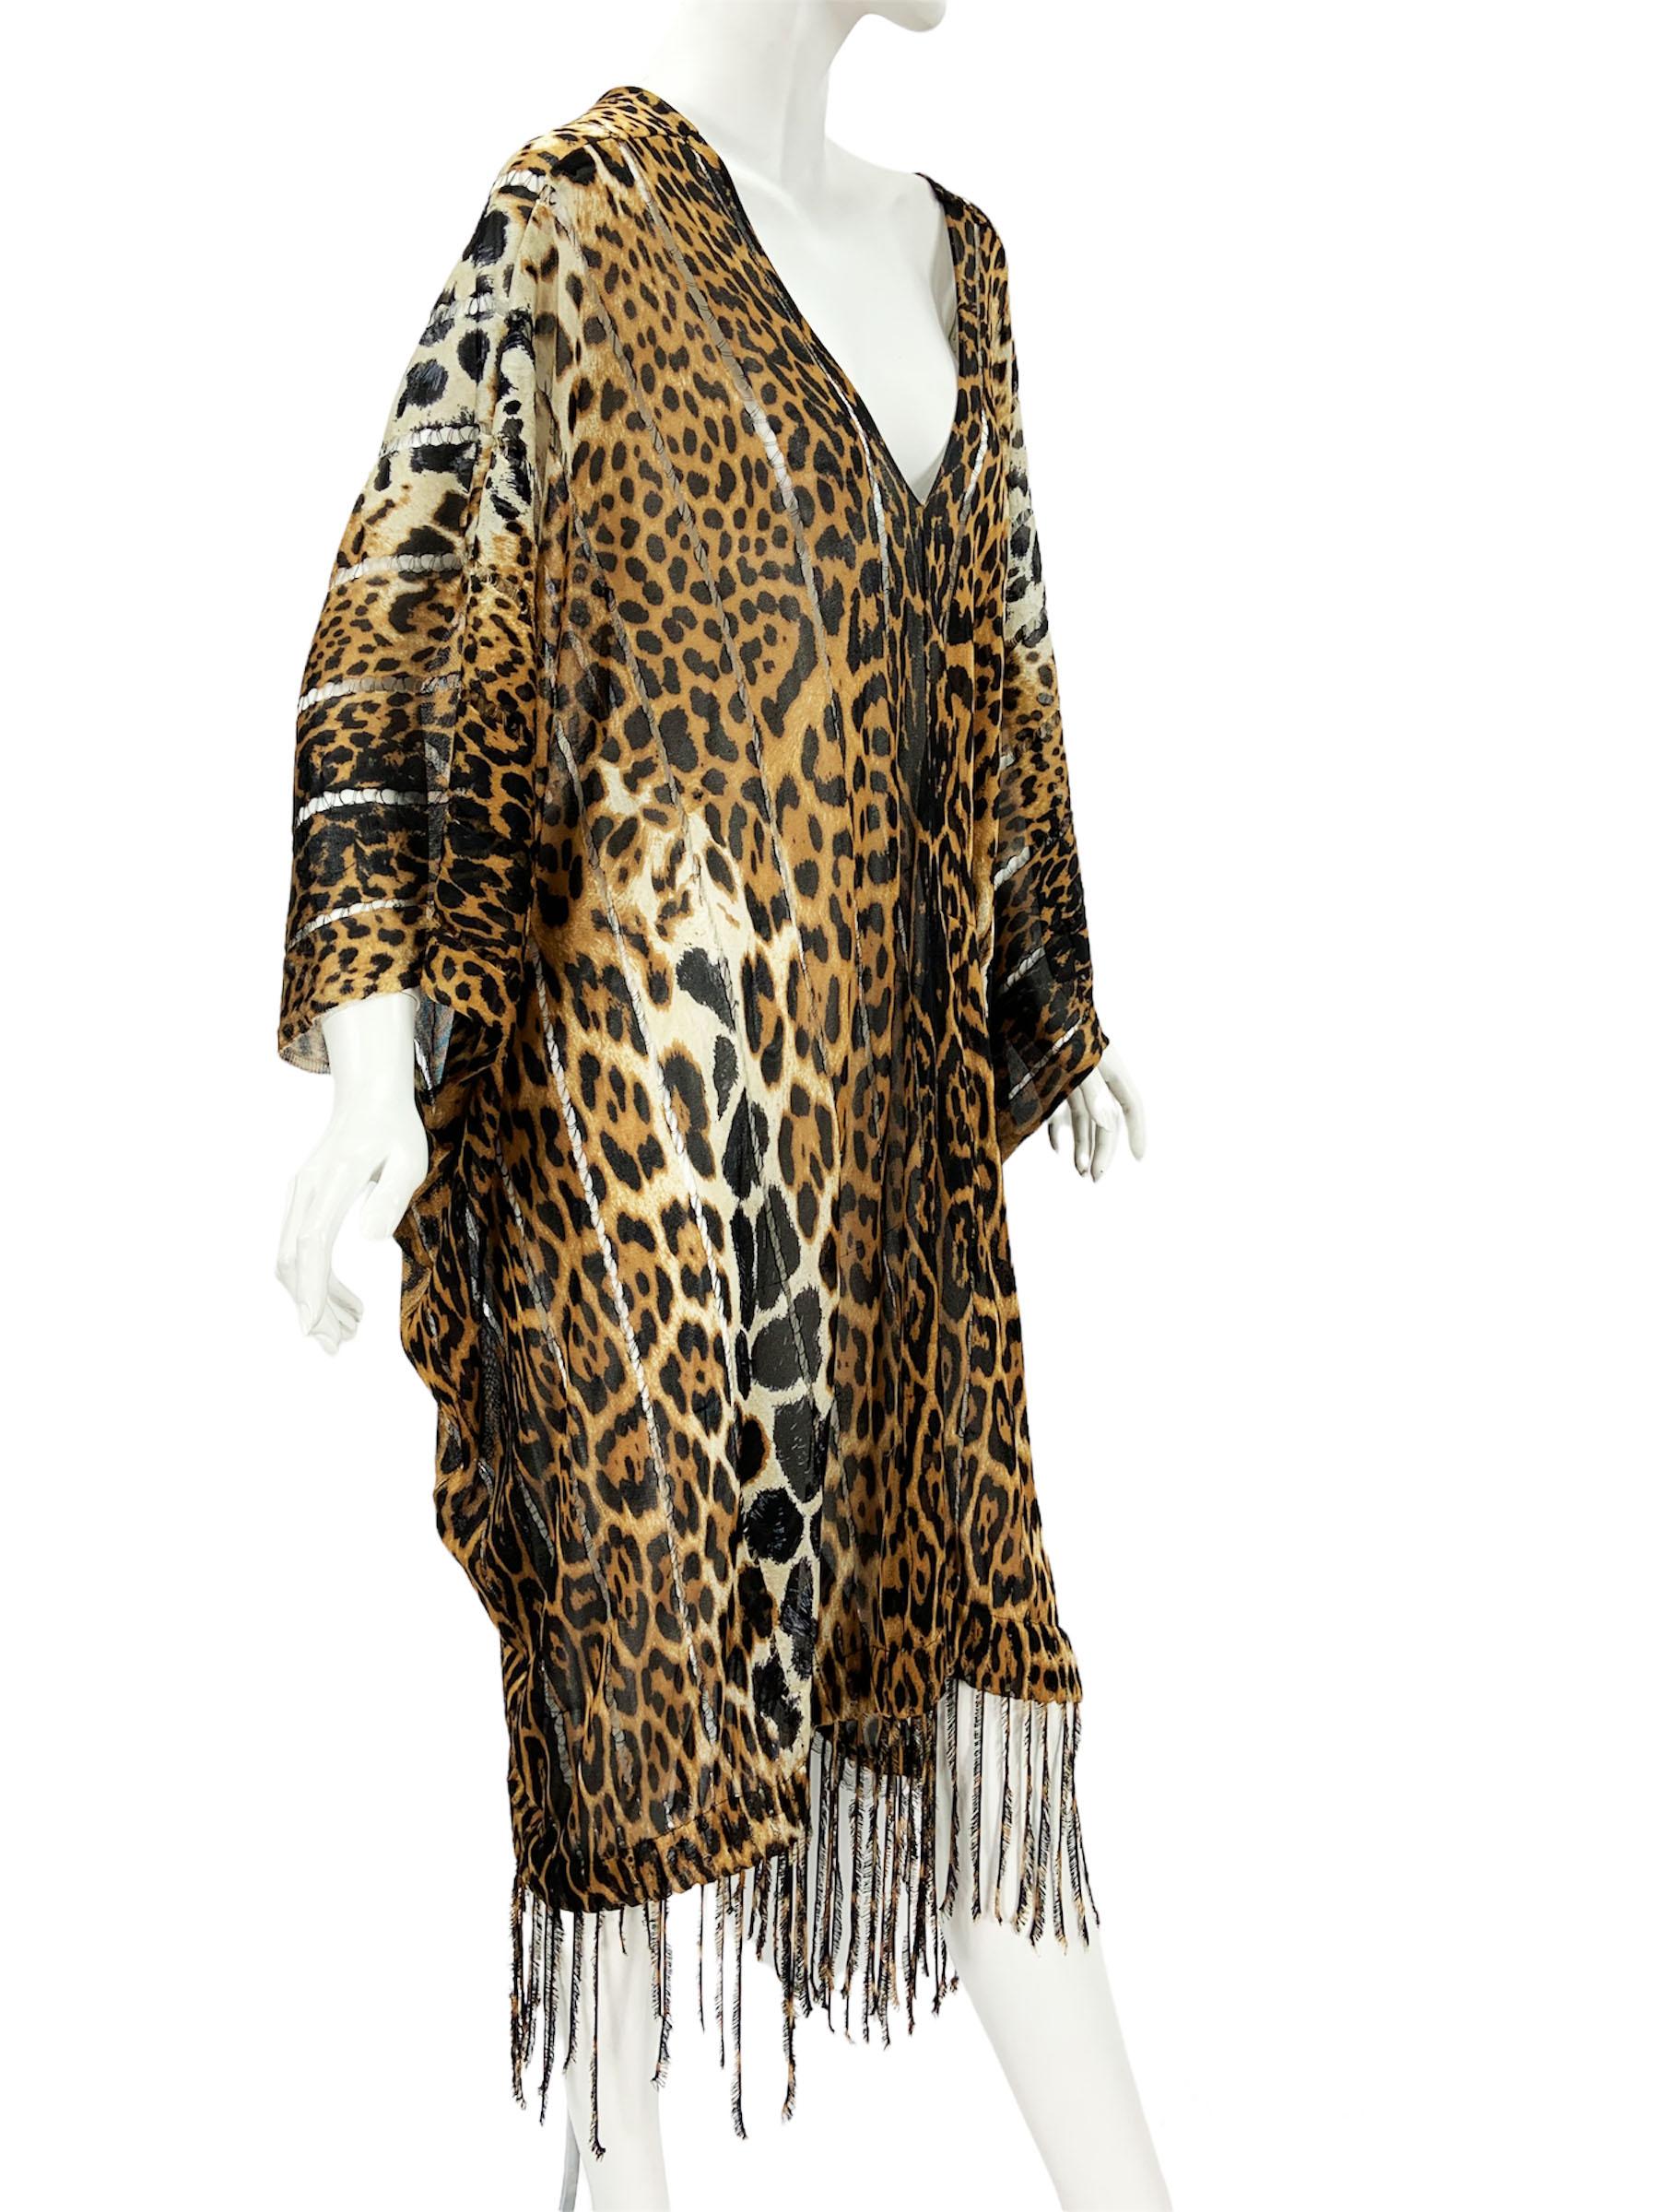 Tom Ford for Yves Saint Saint Laurent Rive Gauche Caftan.
S/S 2002 Runway Collection
100% silk, with fringe hem. Iconic YSL leopard / cheetah print.
Crochet detail throughout. This is an incredible Museum worthy piece!
Designer size - M. Will fit